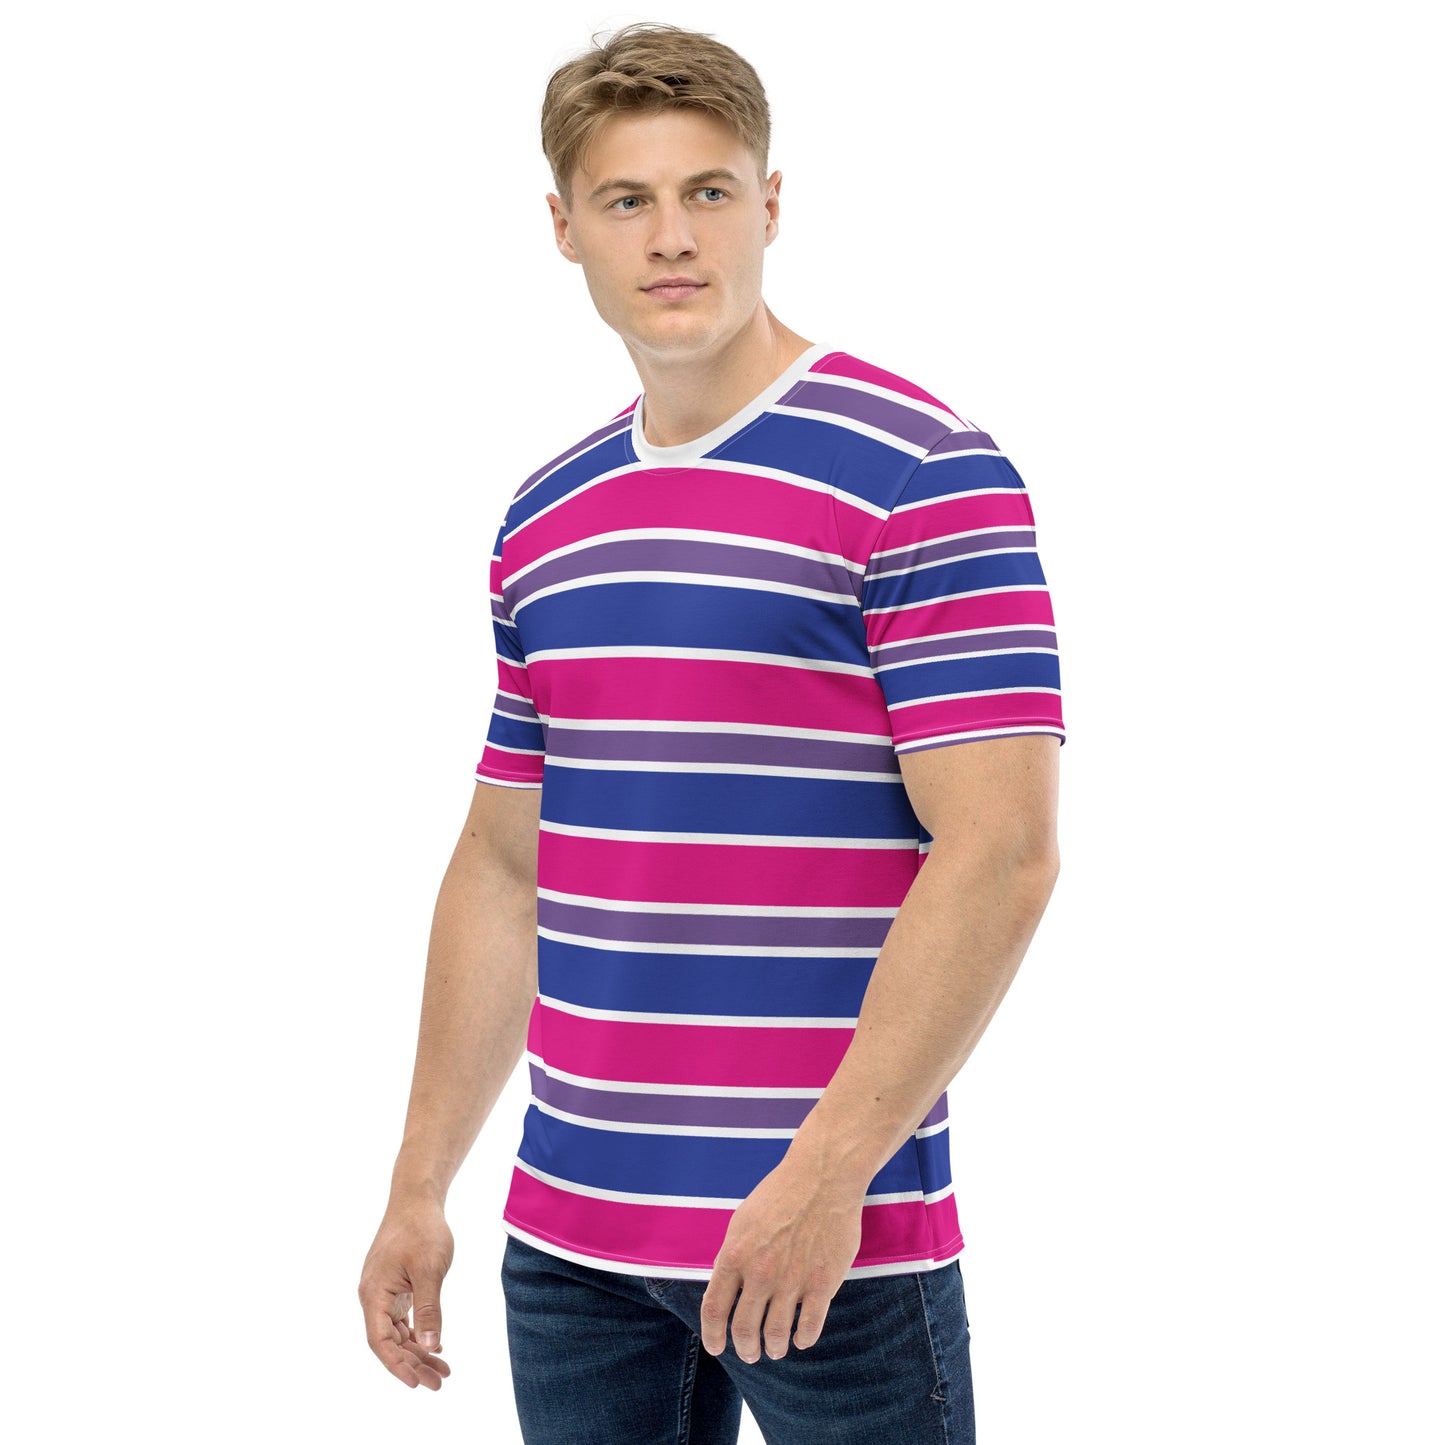 Bisexual Pride Stripes Unisex Cut & Sew All Over Print Tee Shirt